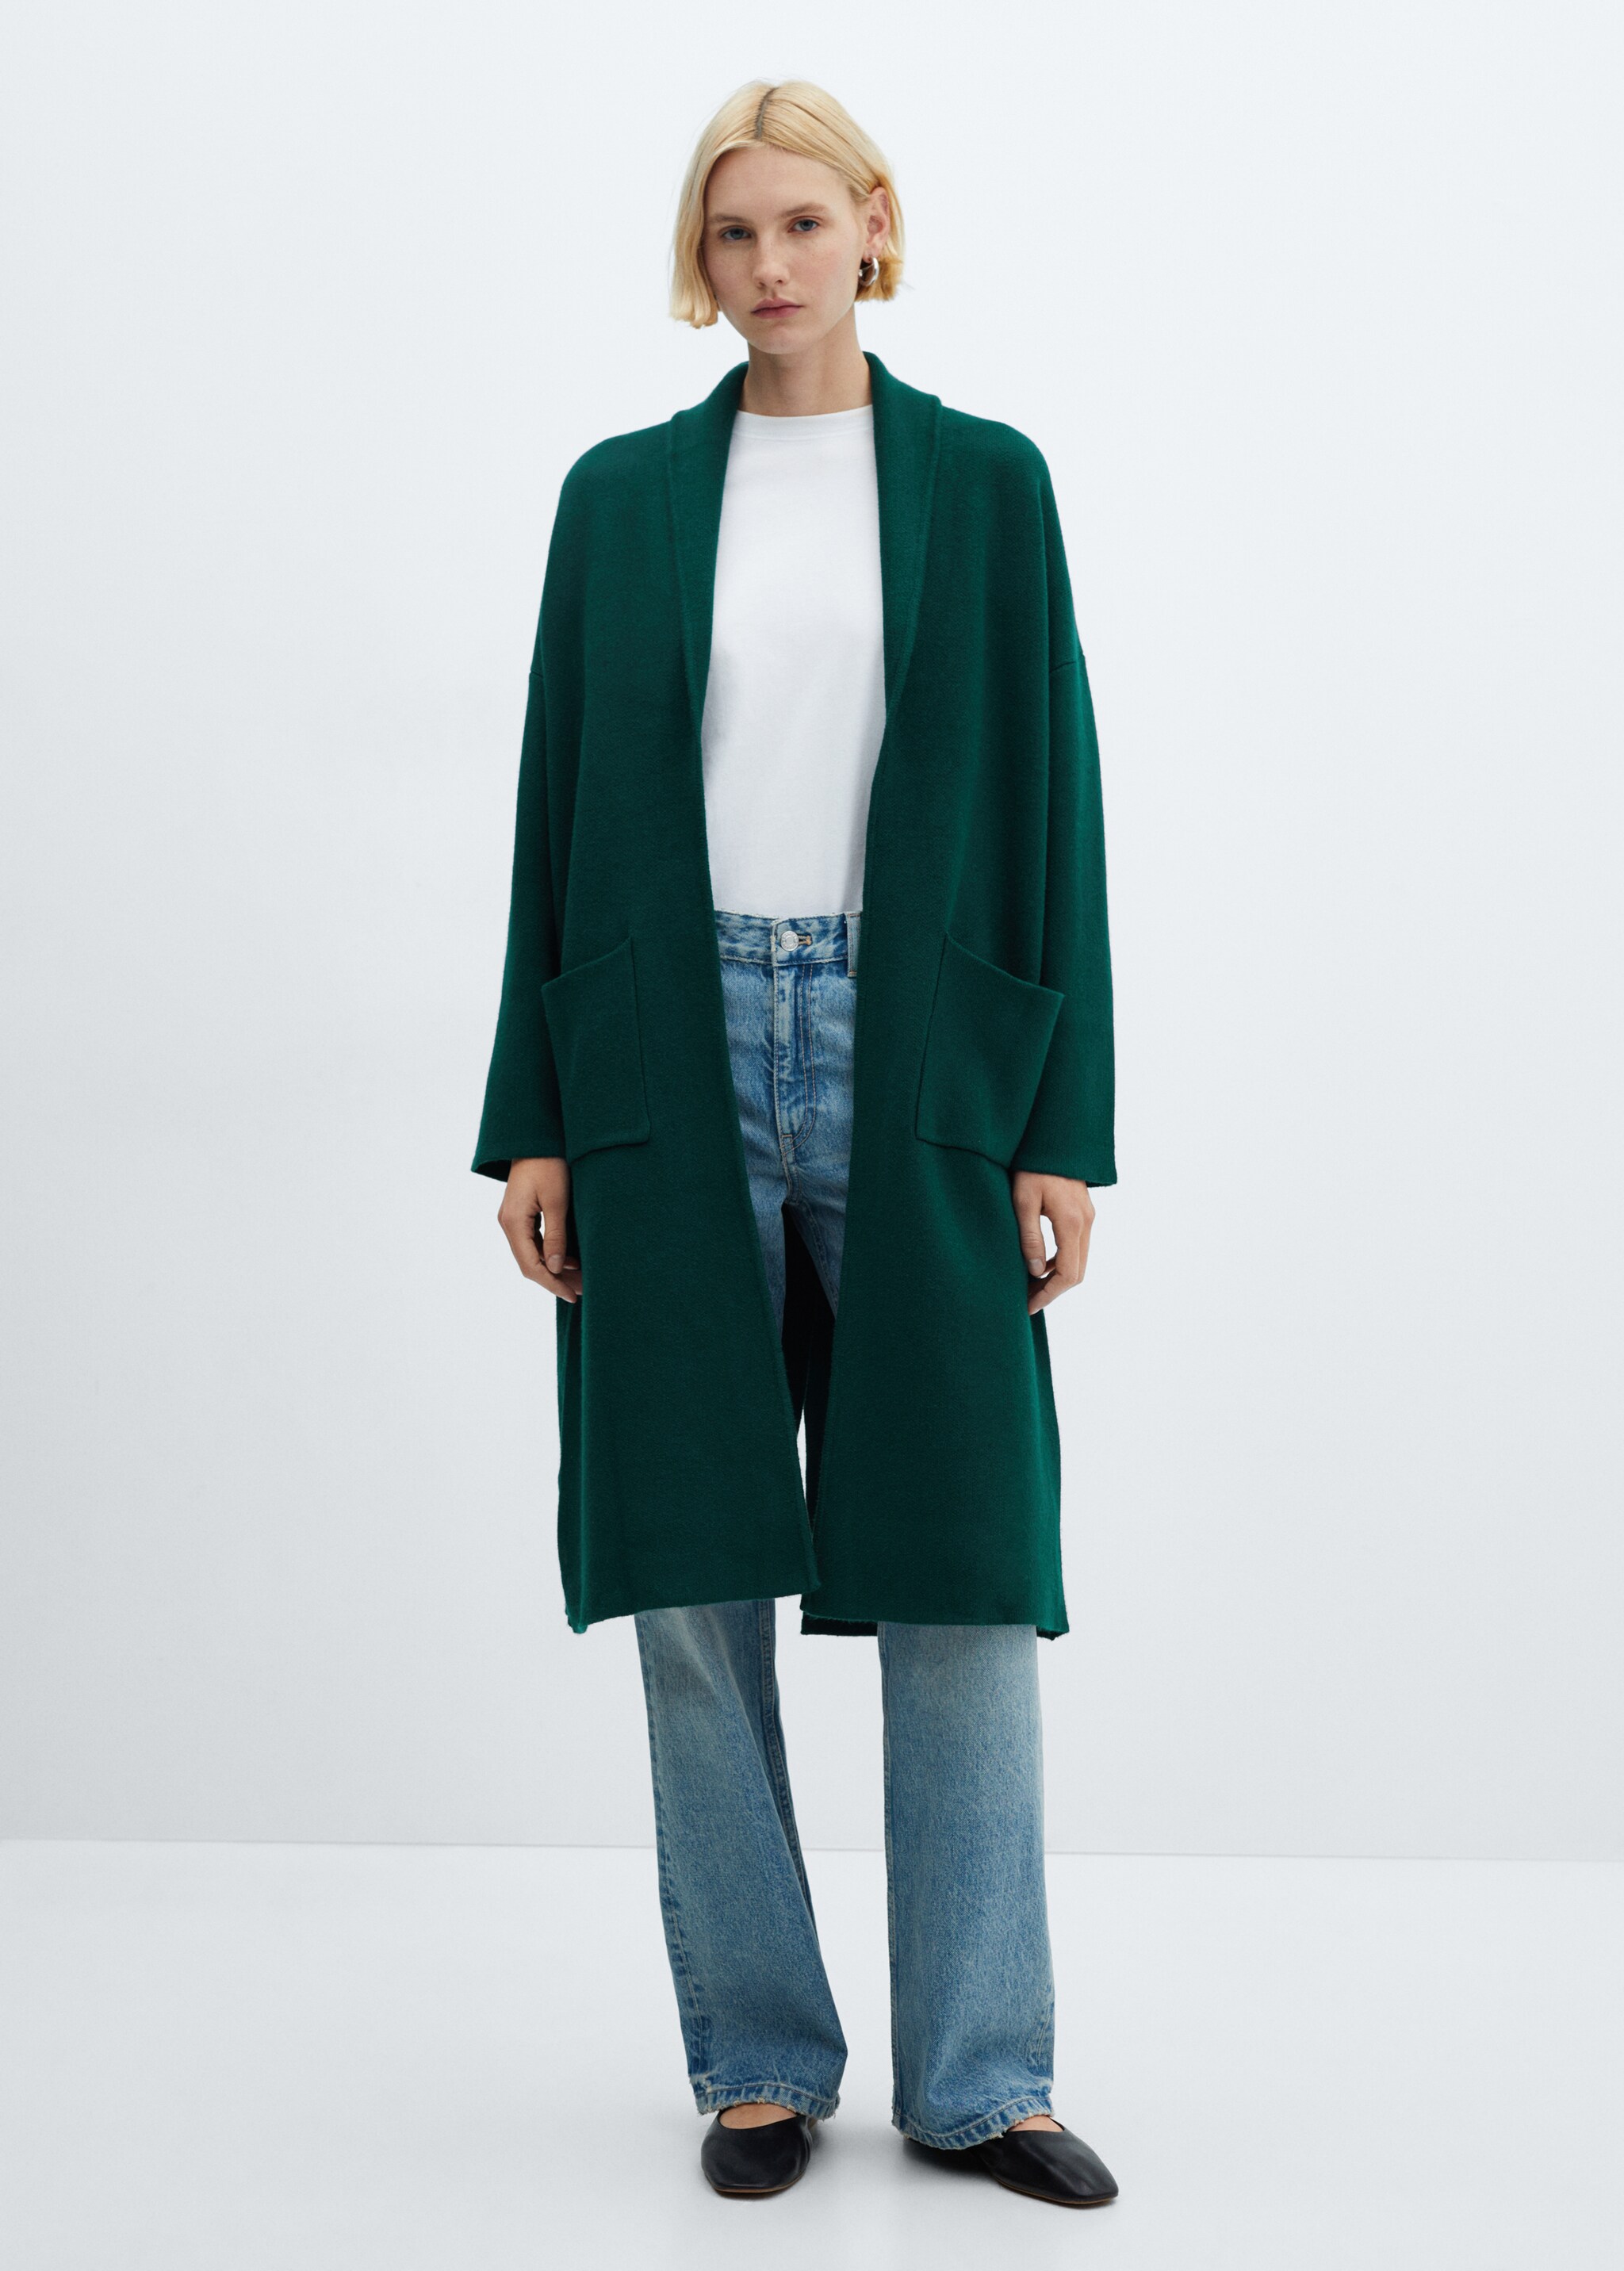 Oversized knitted coat with pockets - General plane